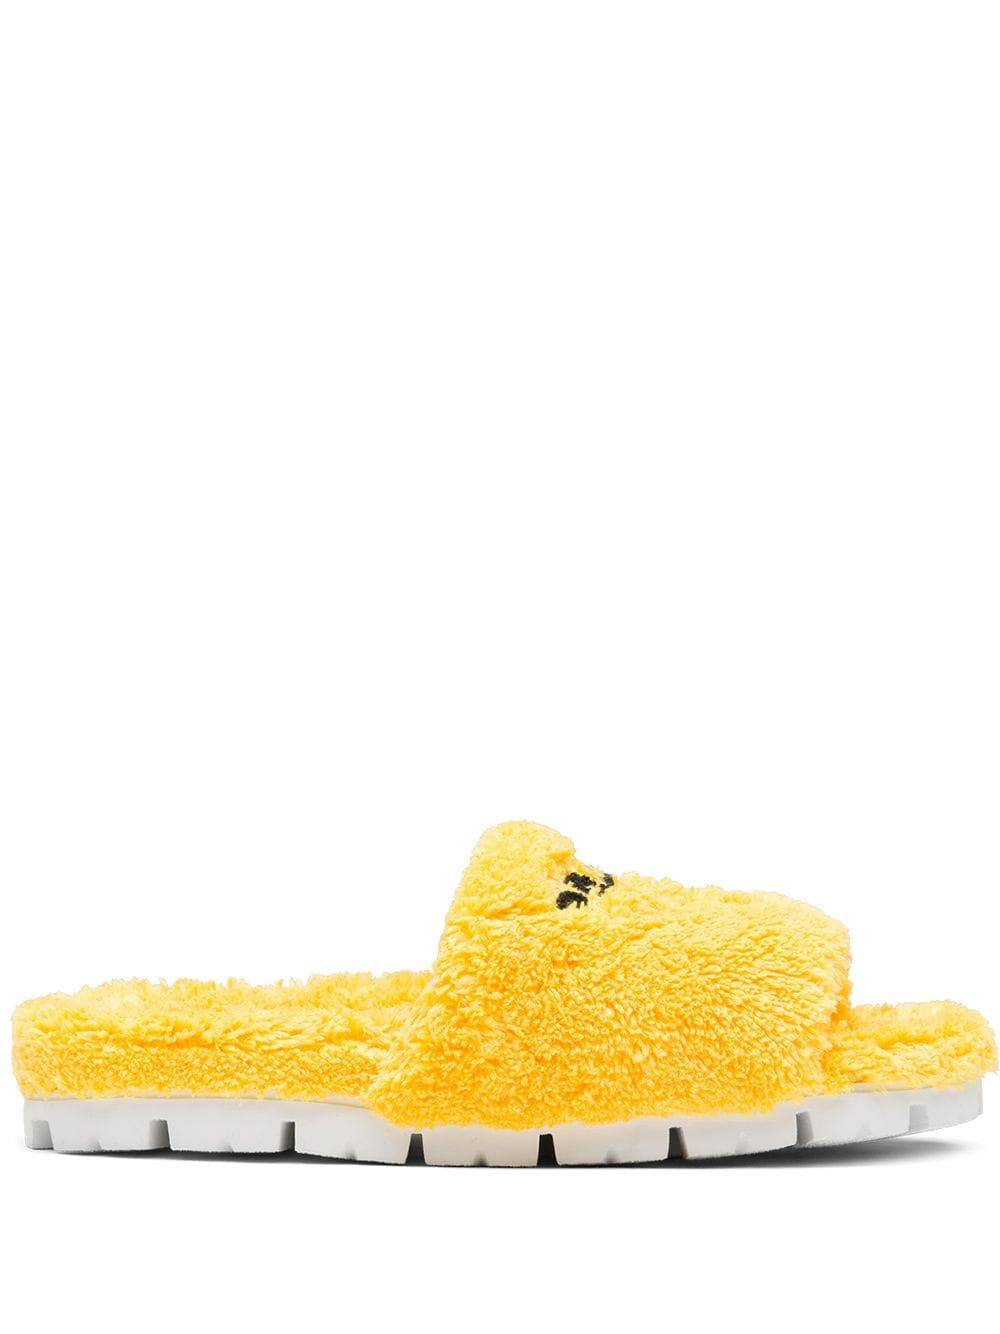 Prada Terry-cloth Embroidered Slides in Yellow | Lyst